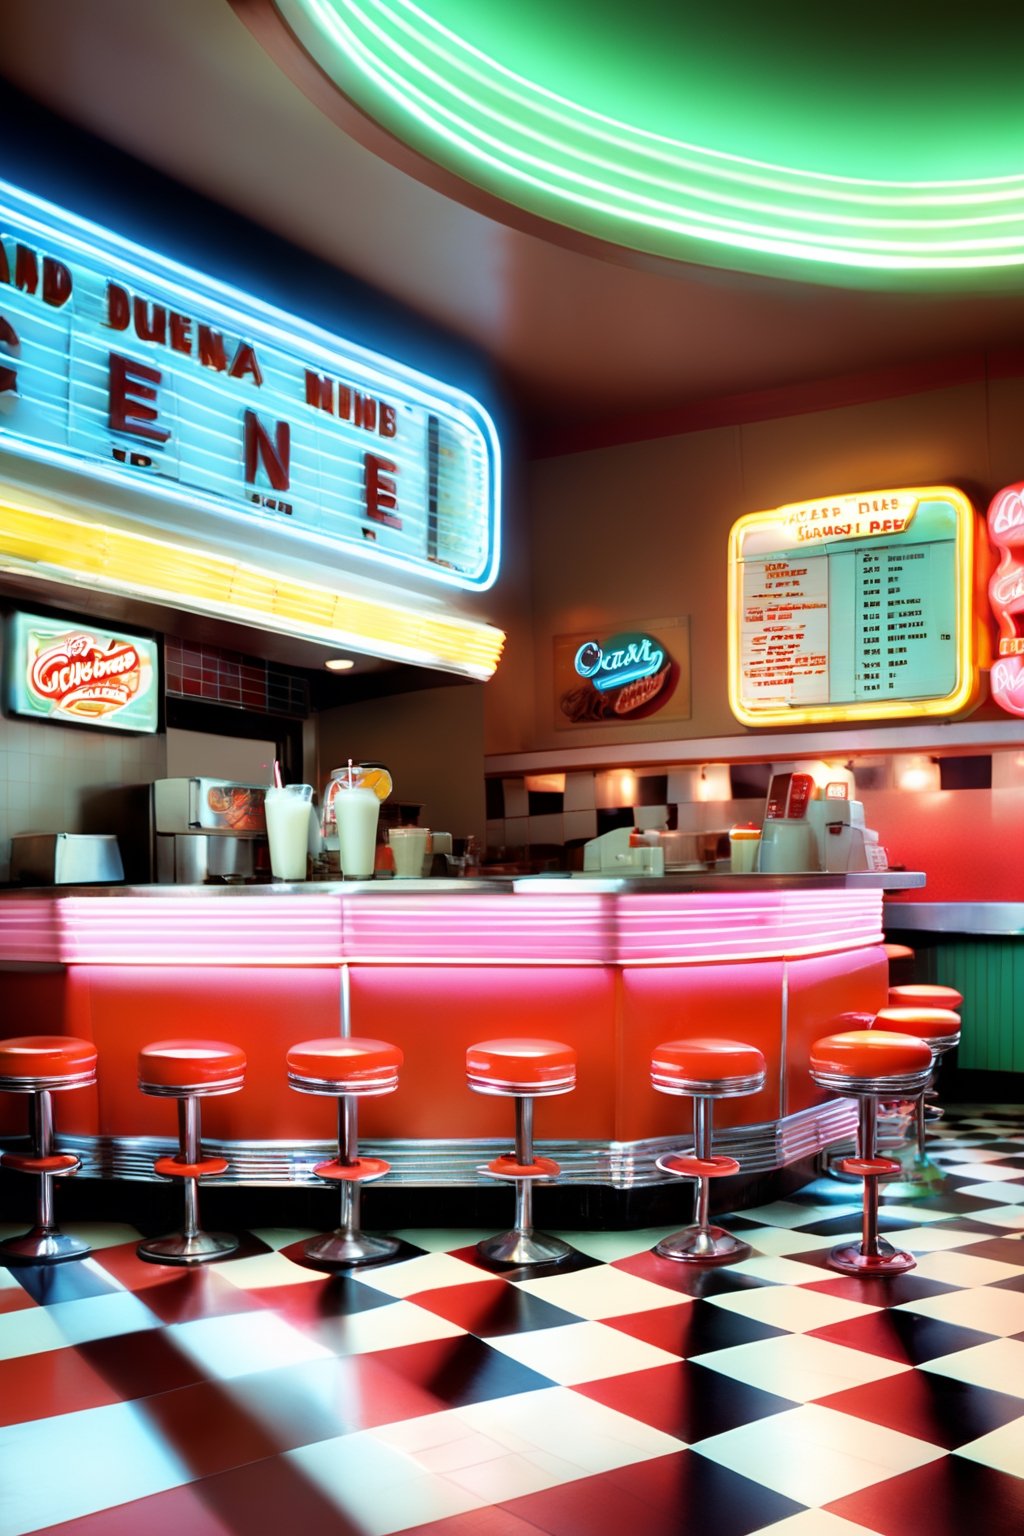 Create an illustration prompt for generating images of a 1980s American diner menu. Imagine a vibrant scene, bustling with retro charm. The menu features classic comfort foods like juicy burgers, crispy fries, and creamy milkshakes. Picture neon signs casting a warm glow over checkerboard floors and chrome accents. Include iconic imagery such as a jukebox playing hits from the era, a soda fountain bubbling with fizzy drinks, and a smiling waitress in a vintage uniform. Capture the nostalgia of a bygone era, where patrons gather for hearty meals and good company. This prompt aims to evoke the essence of Americana, inviting artists to bring this iconic era to life through their illustrations.